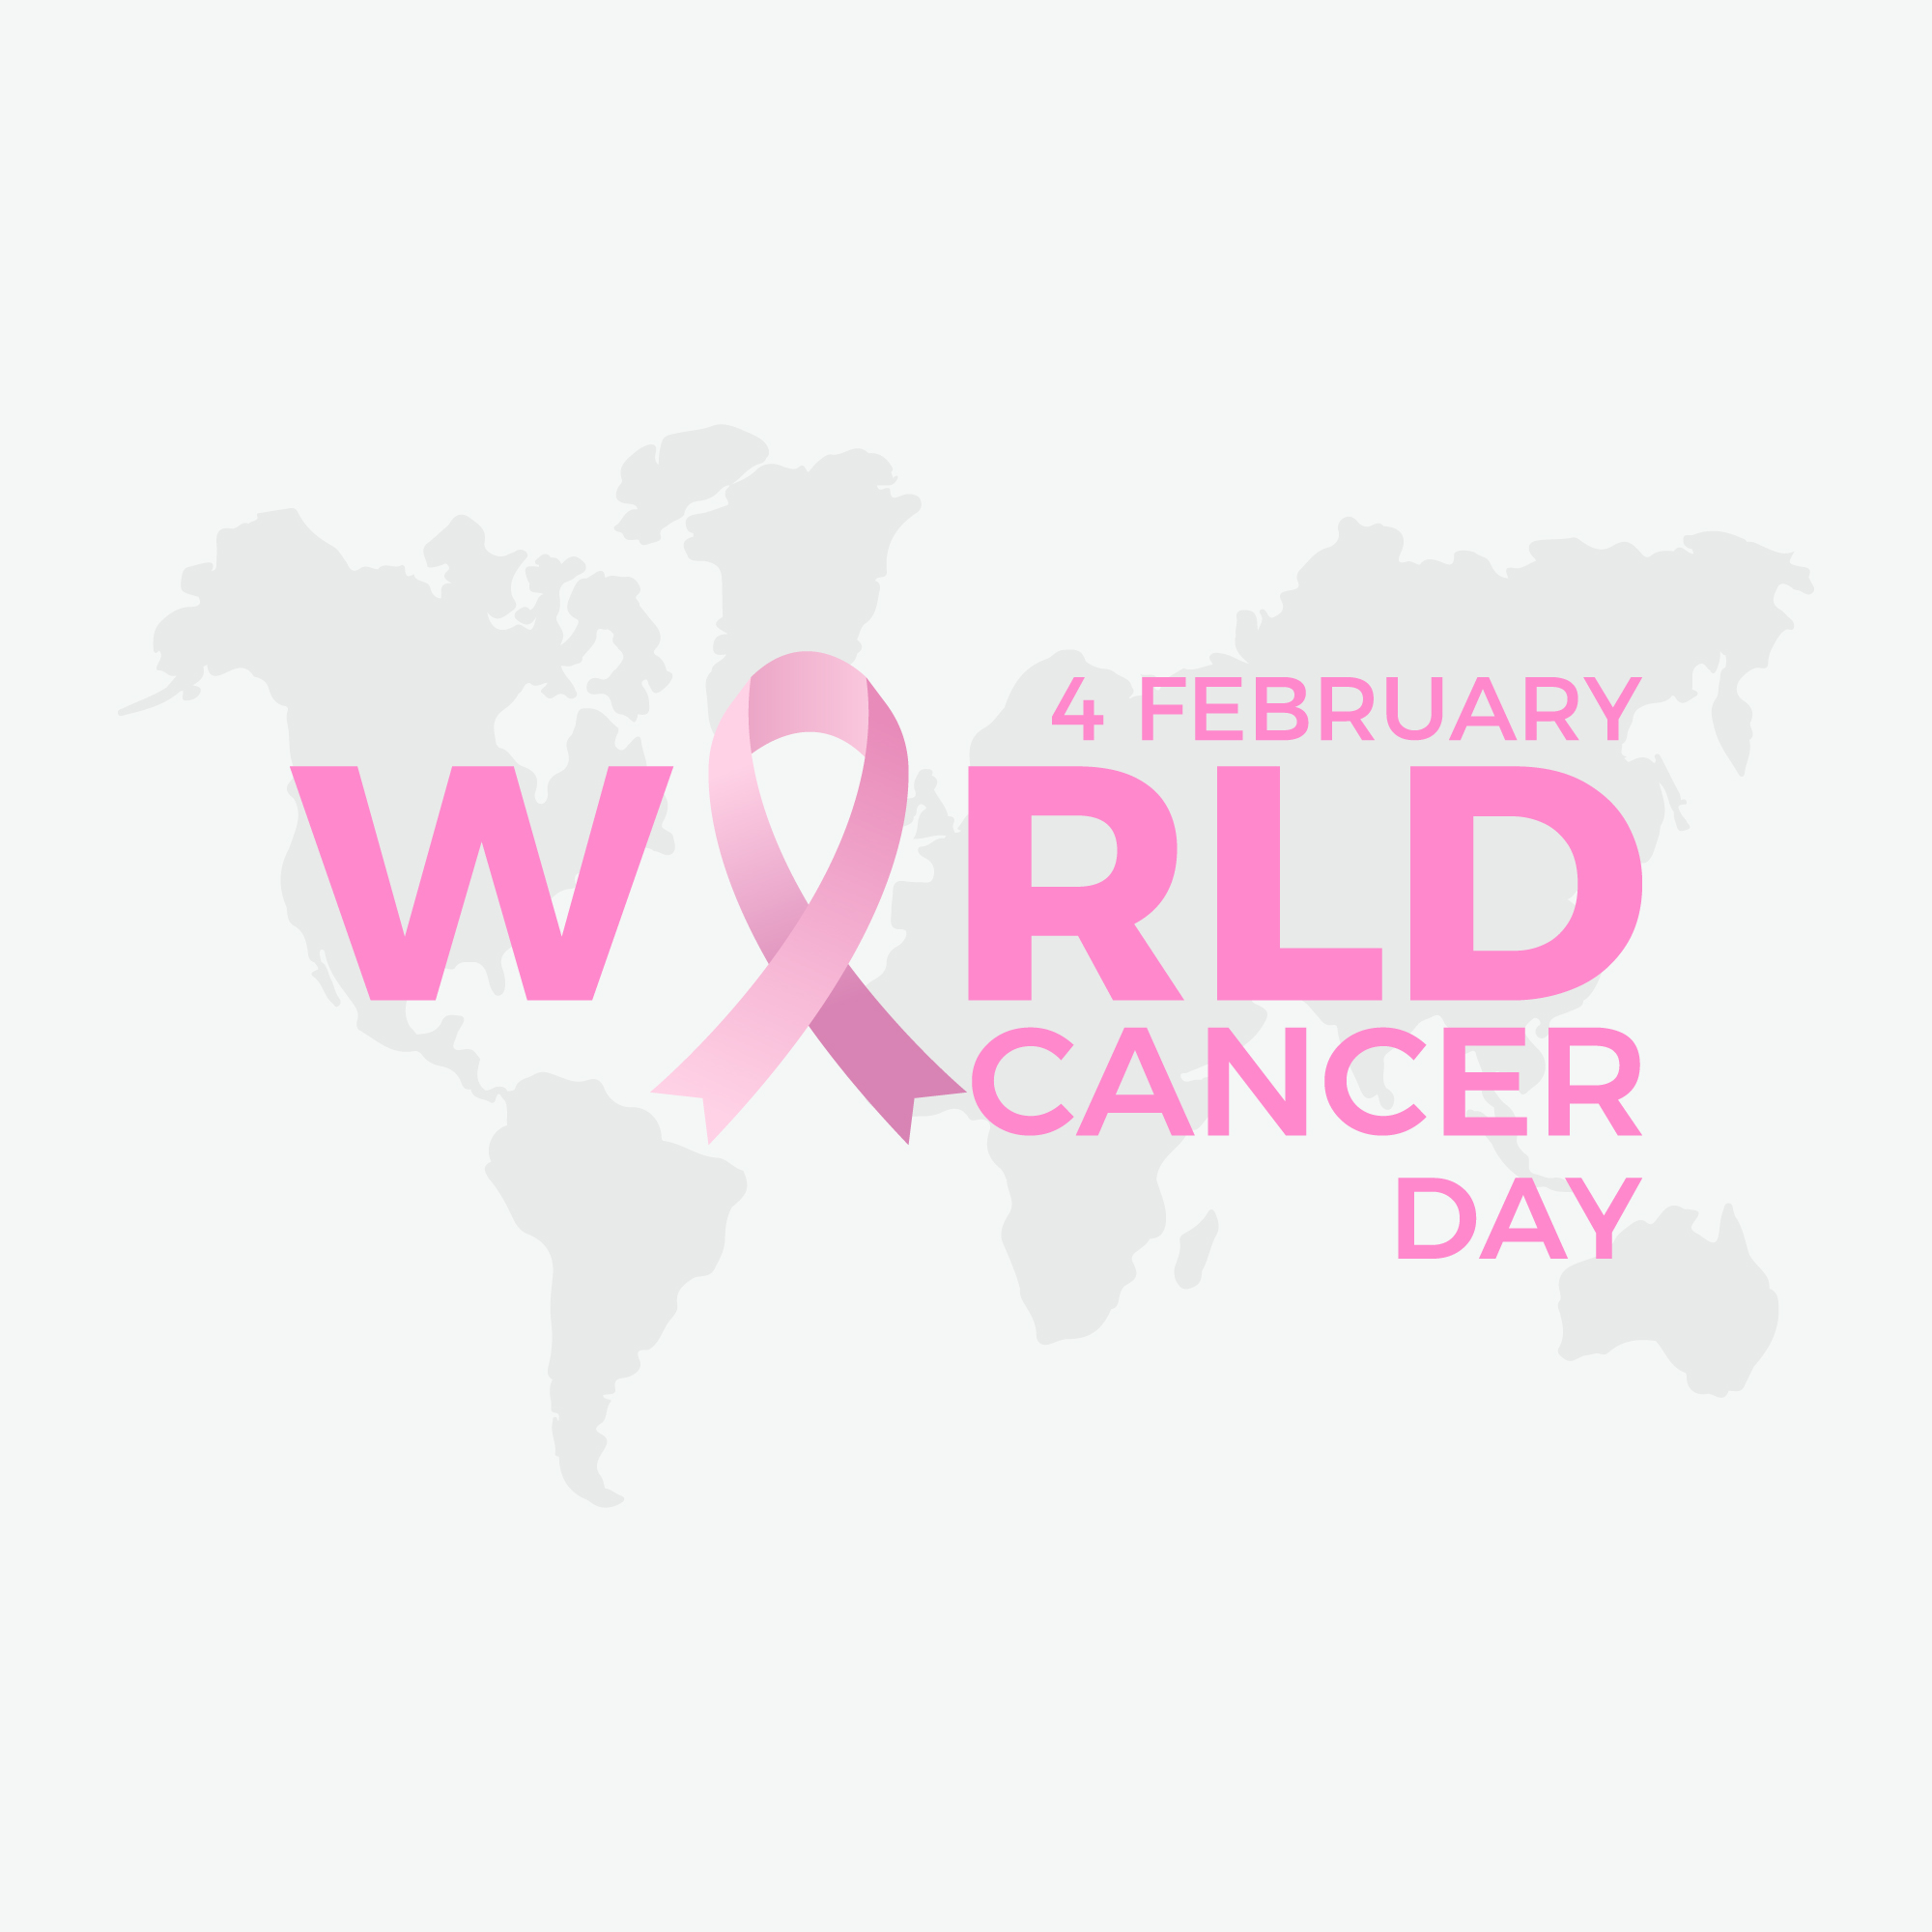 Cancer day preview image.